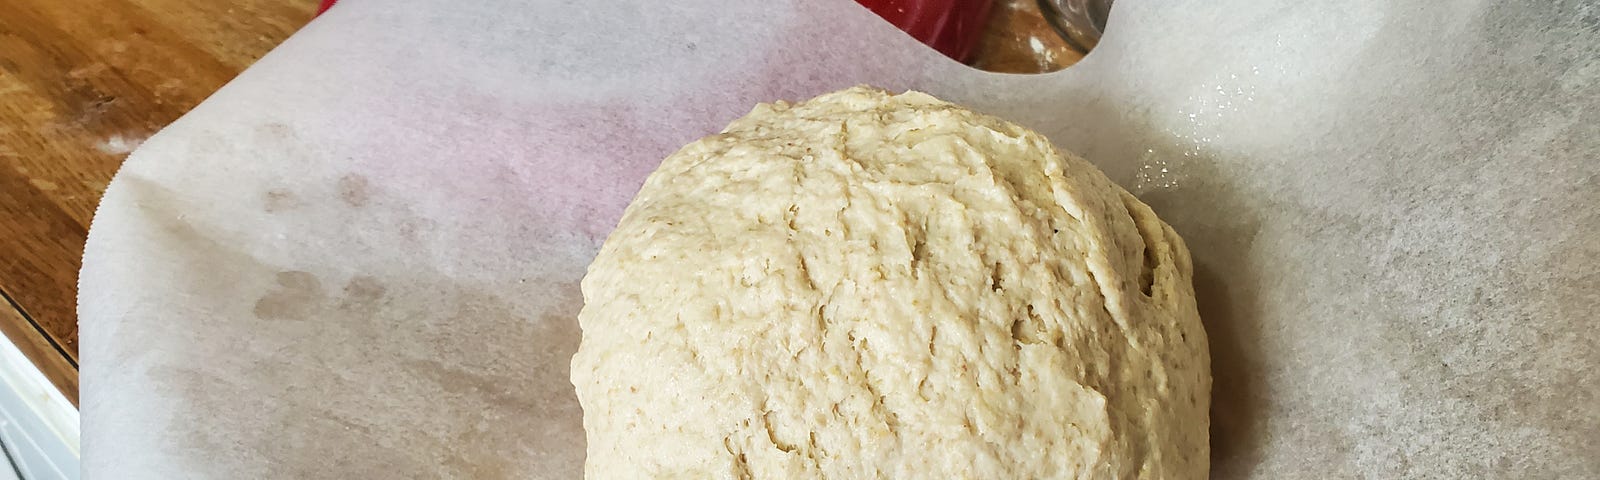 Loaf of gluten free bread dough resting on a sheet of parchment paper.